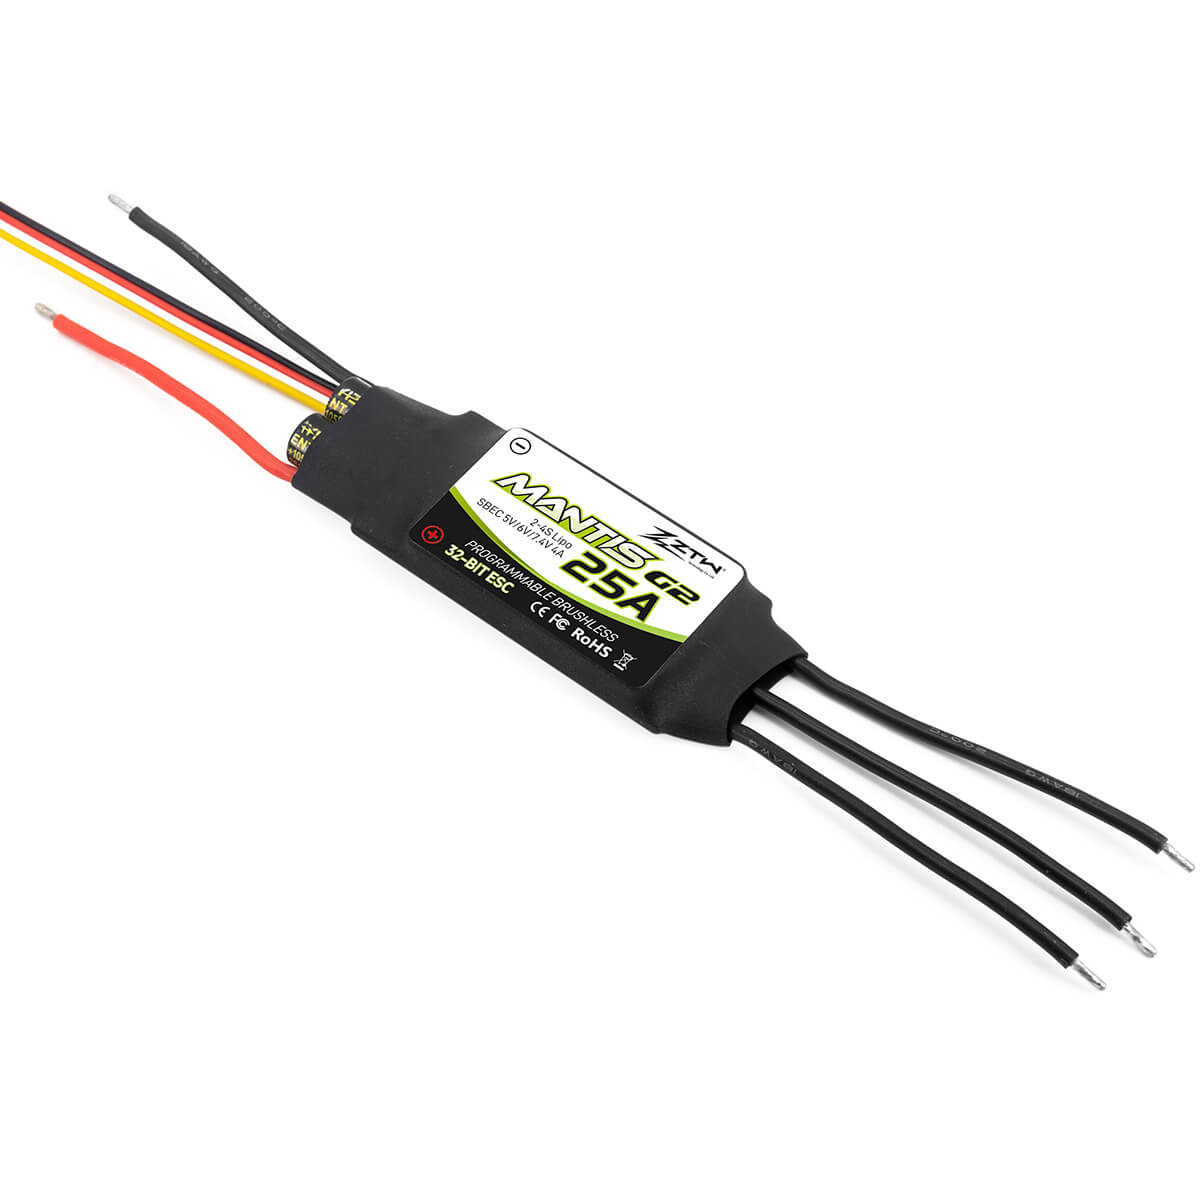 ZTW Mantis 25A SBEC G2 Series ESC for Airplanes